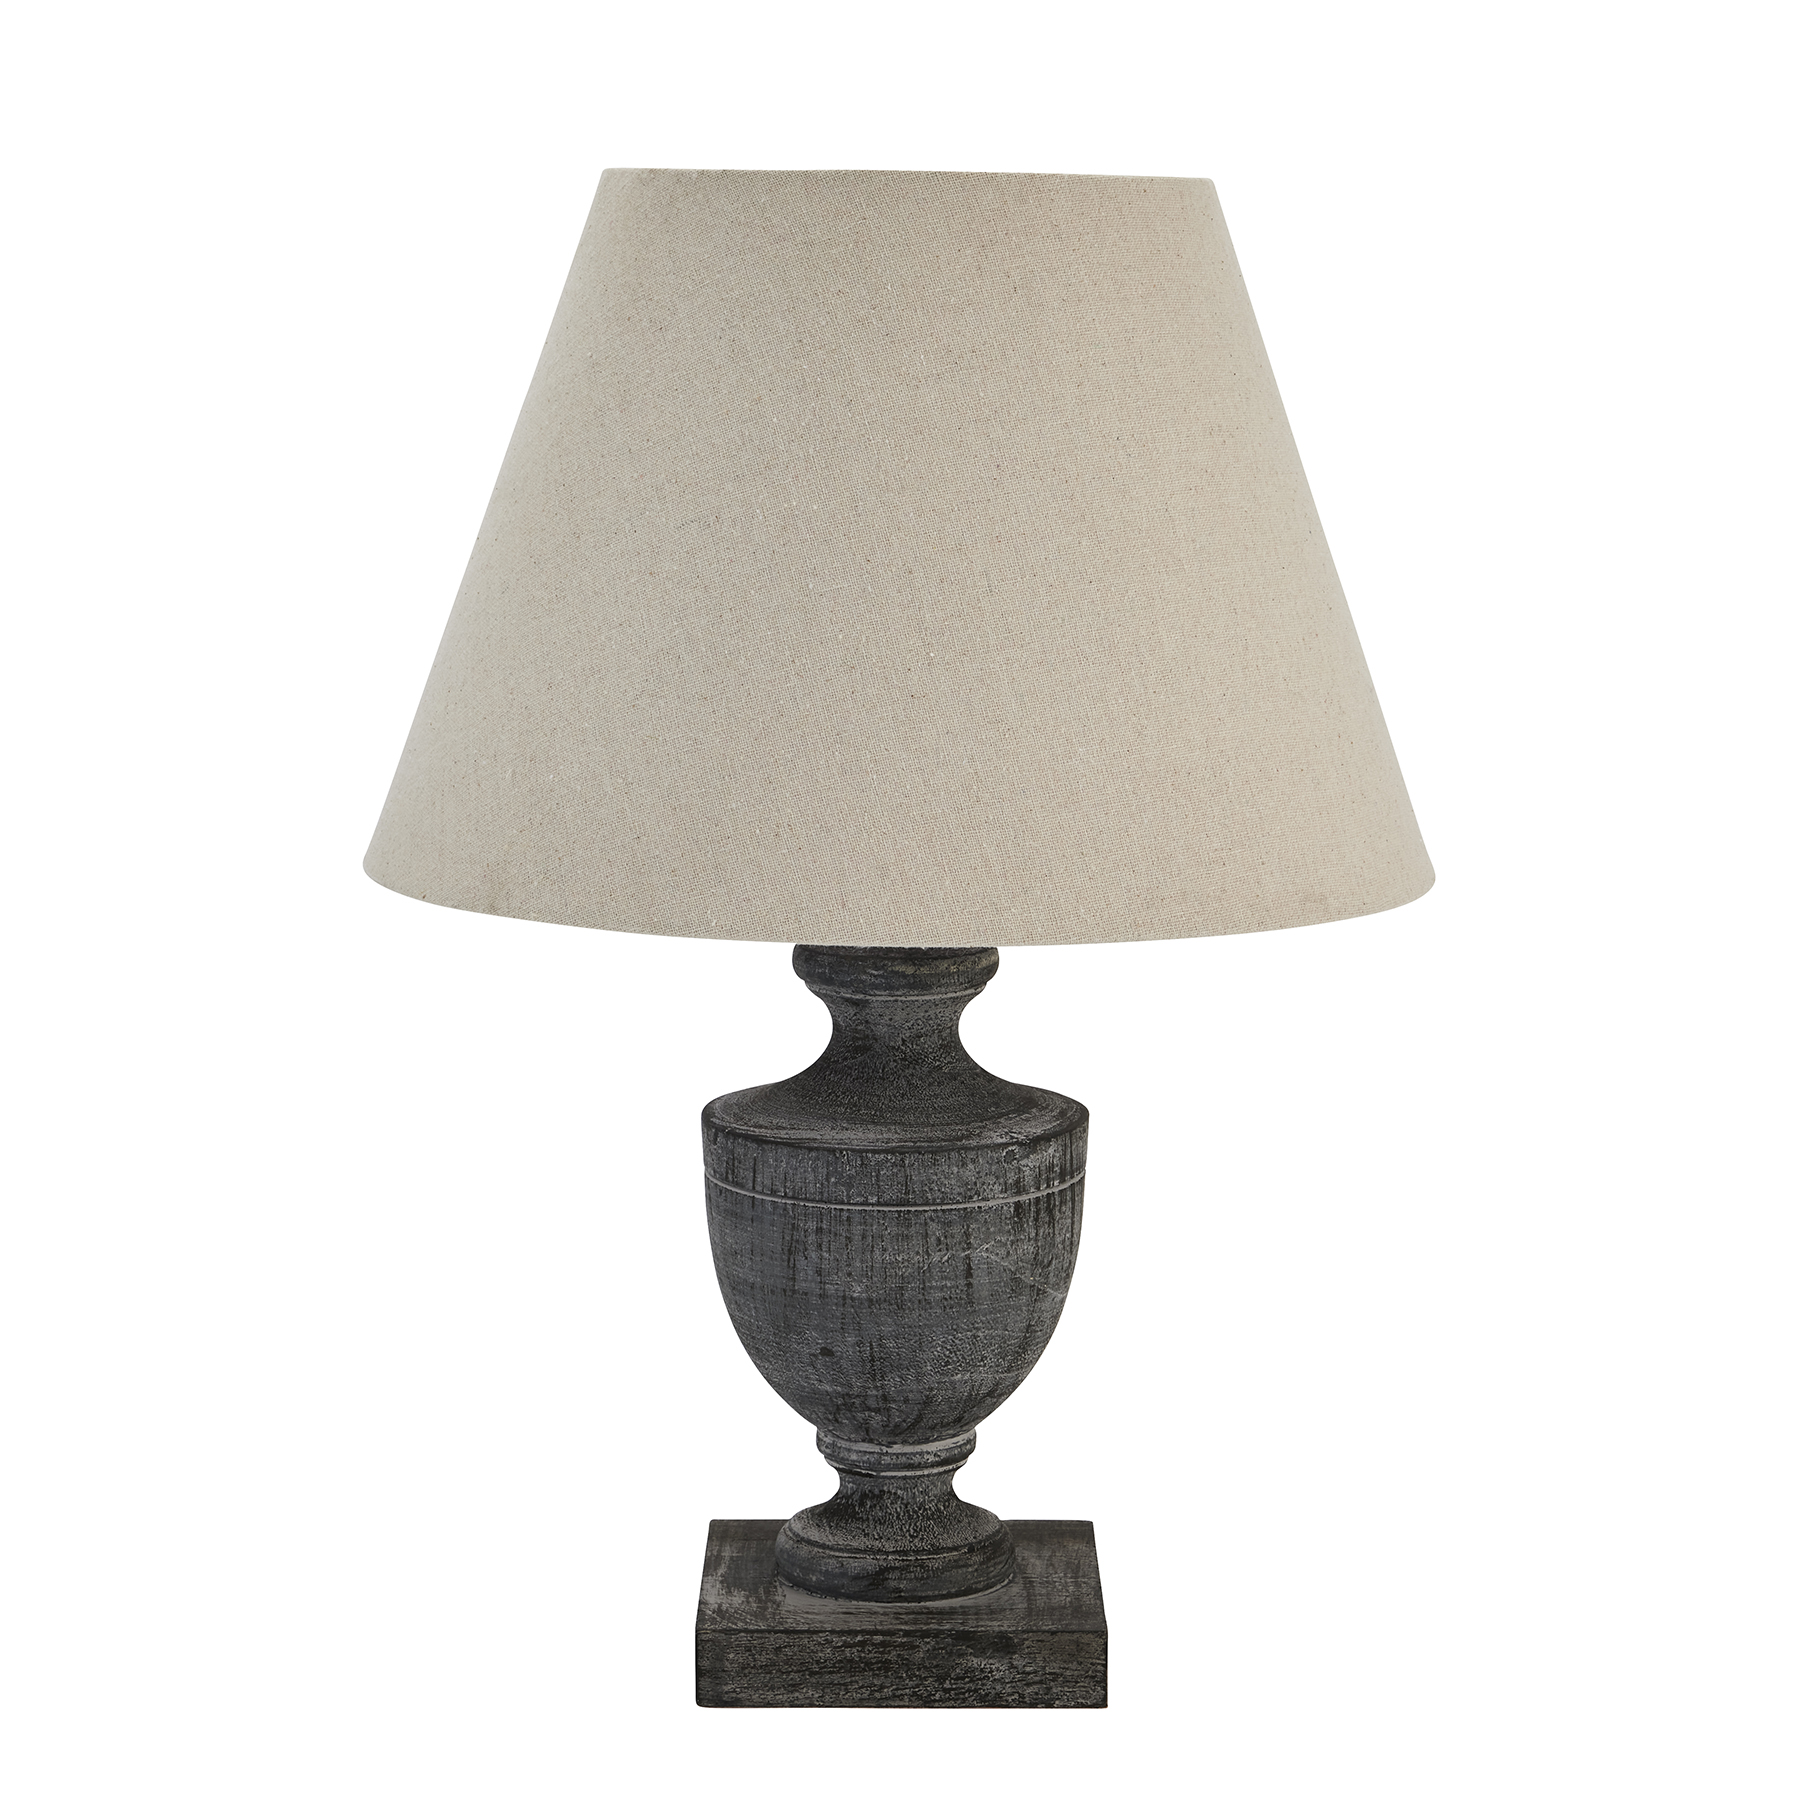 Incia Urn Wooden Table Lamp - Image 1